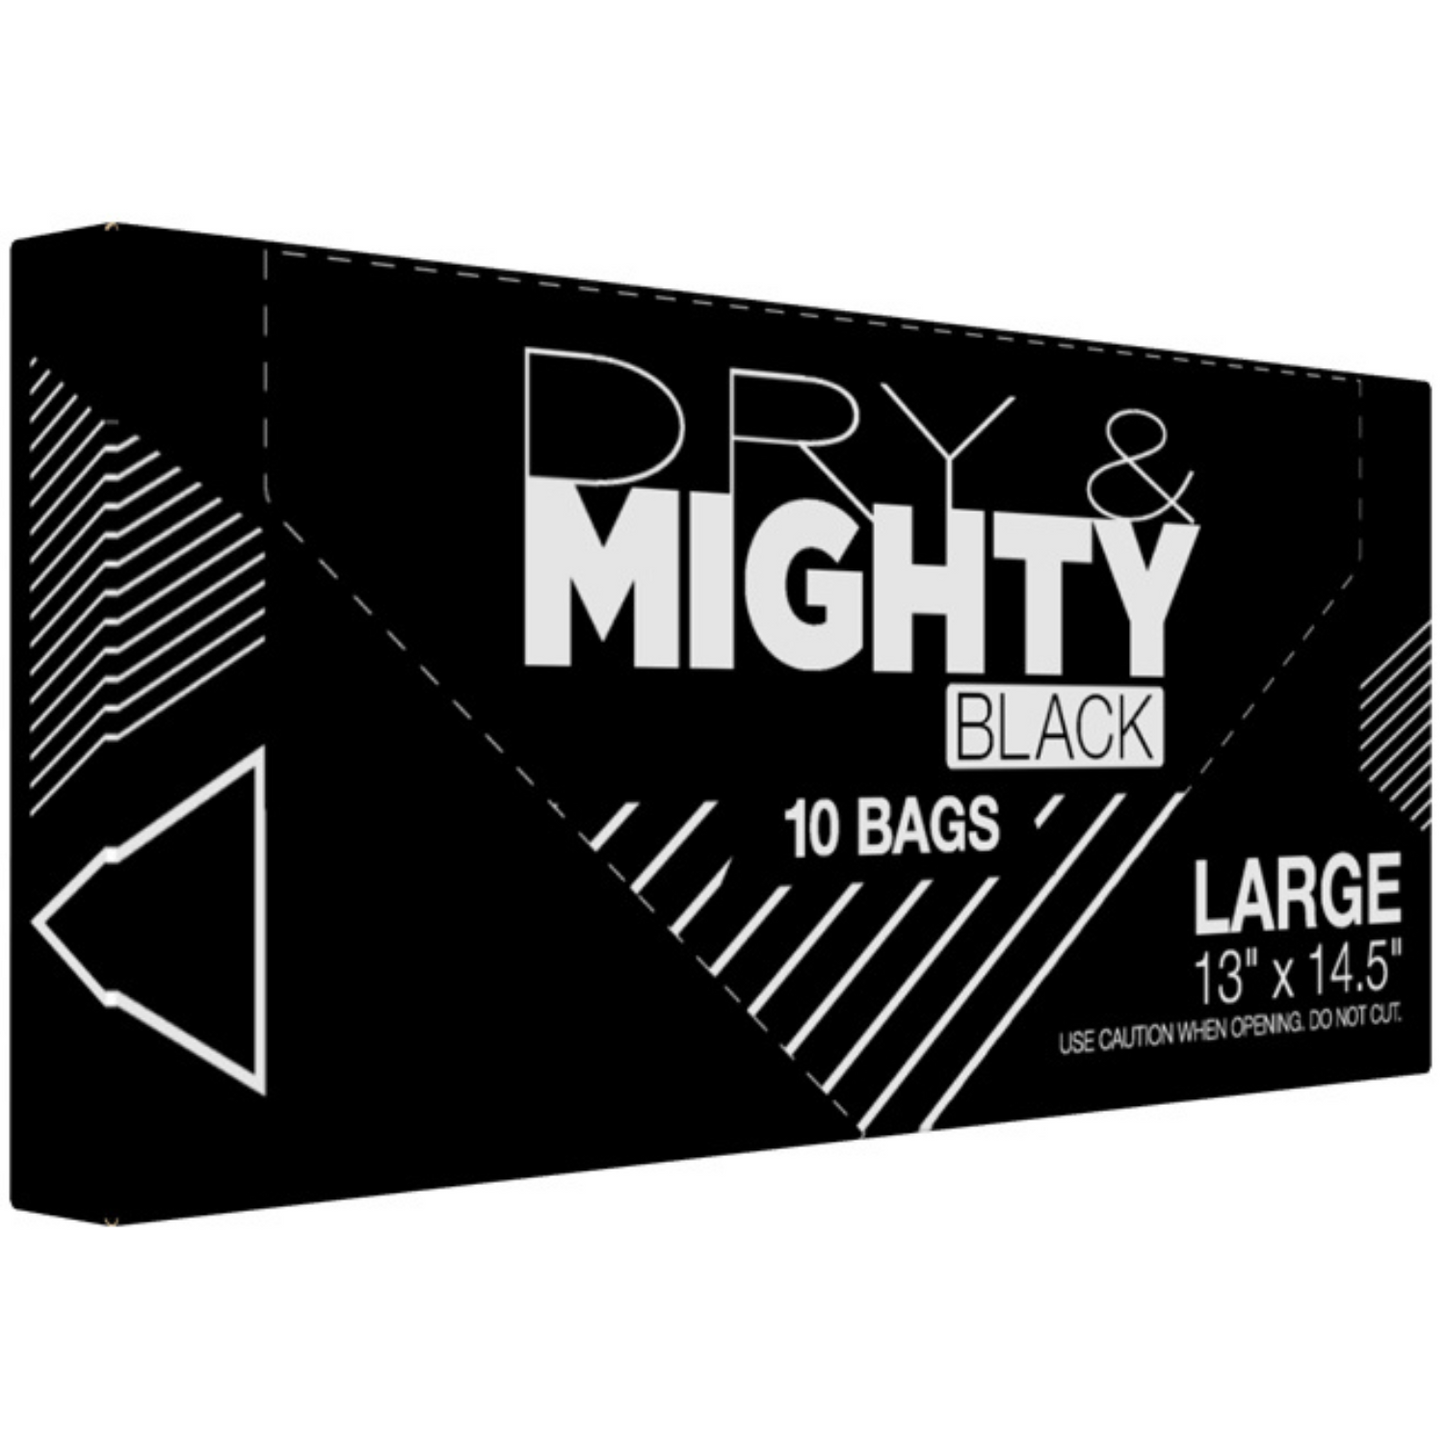 Dry & Mighty Black Bags Large 10 Pack